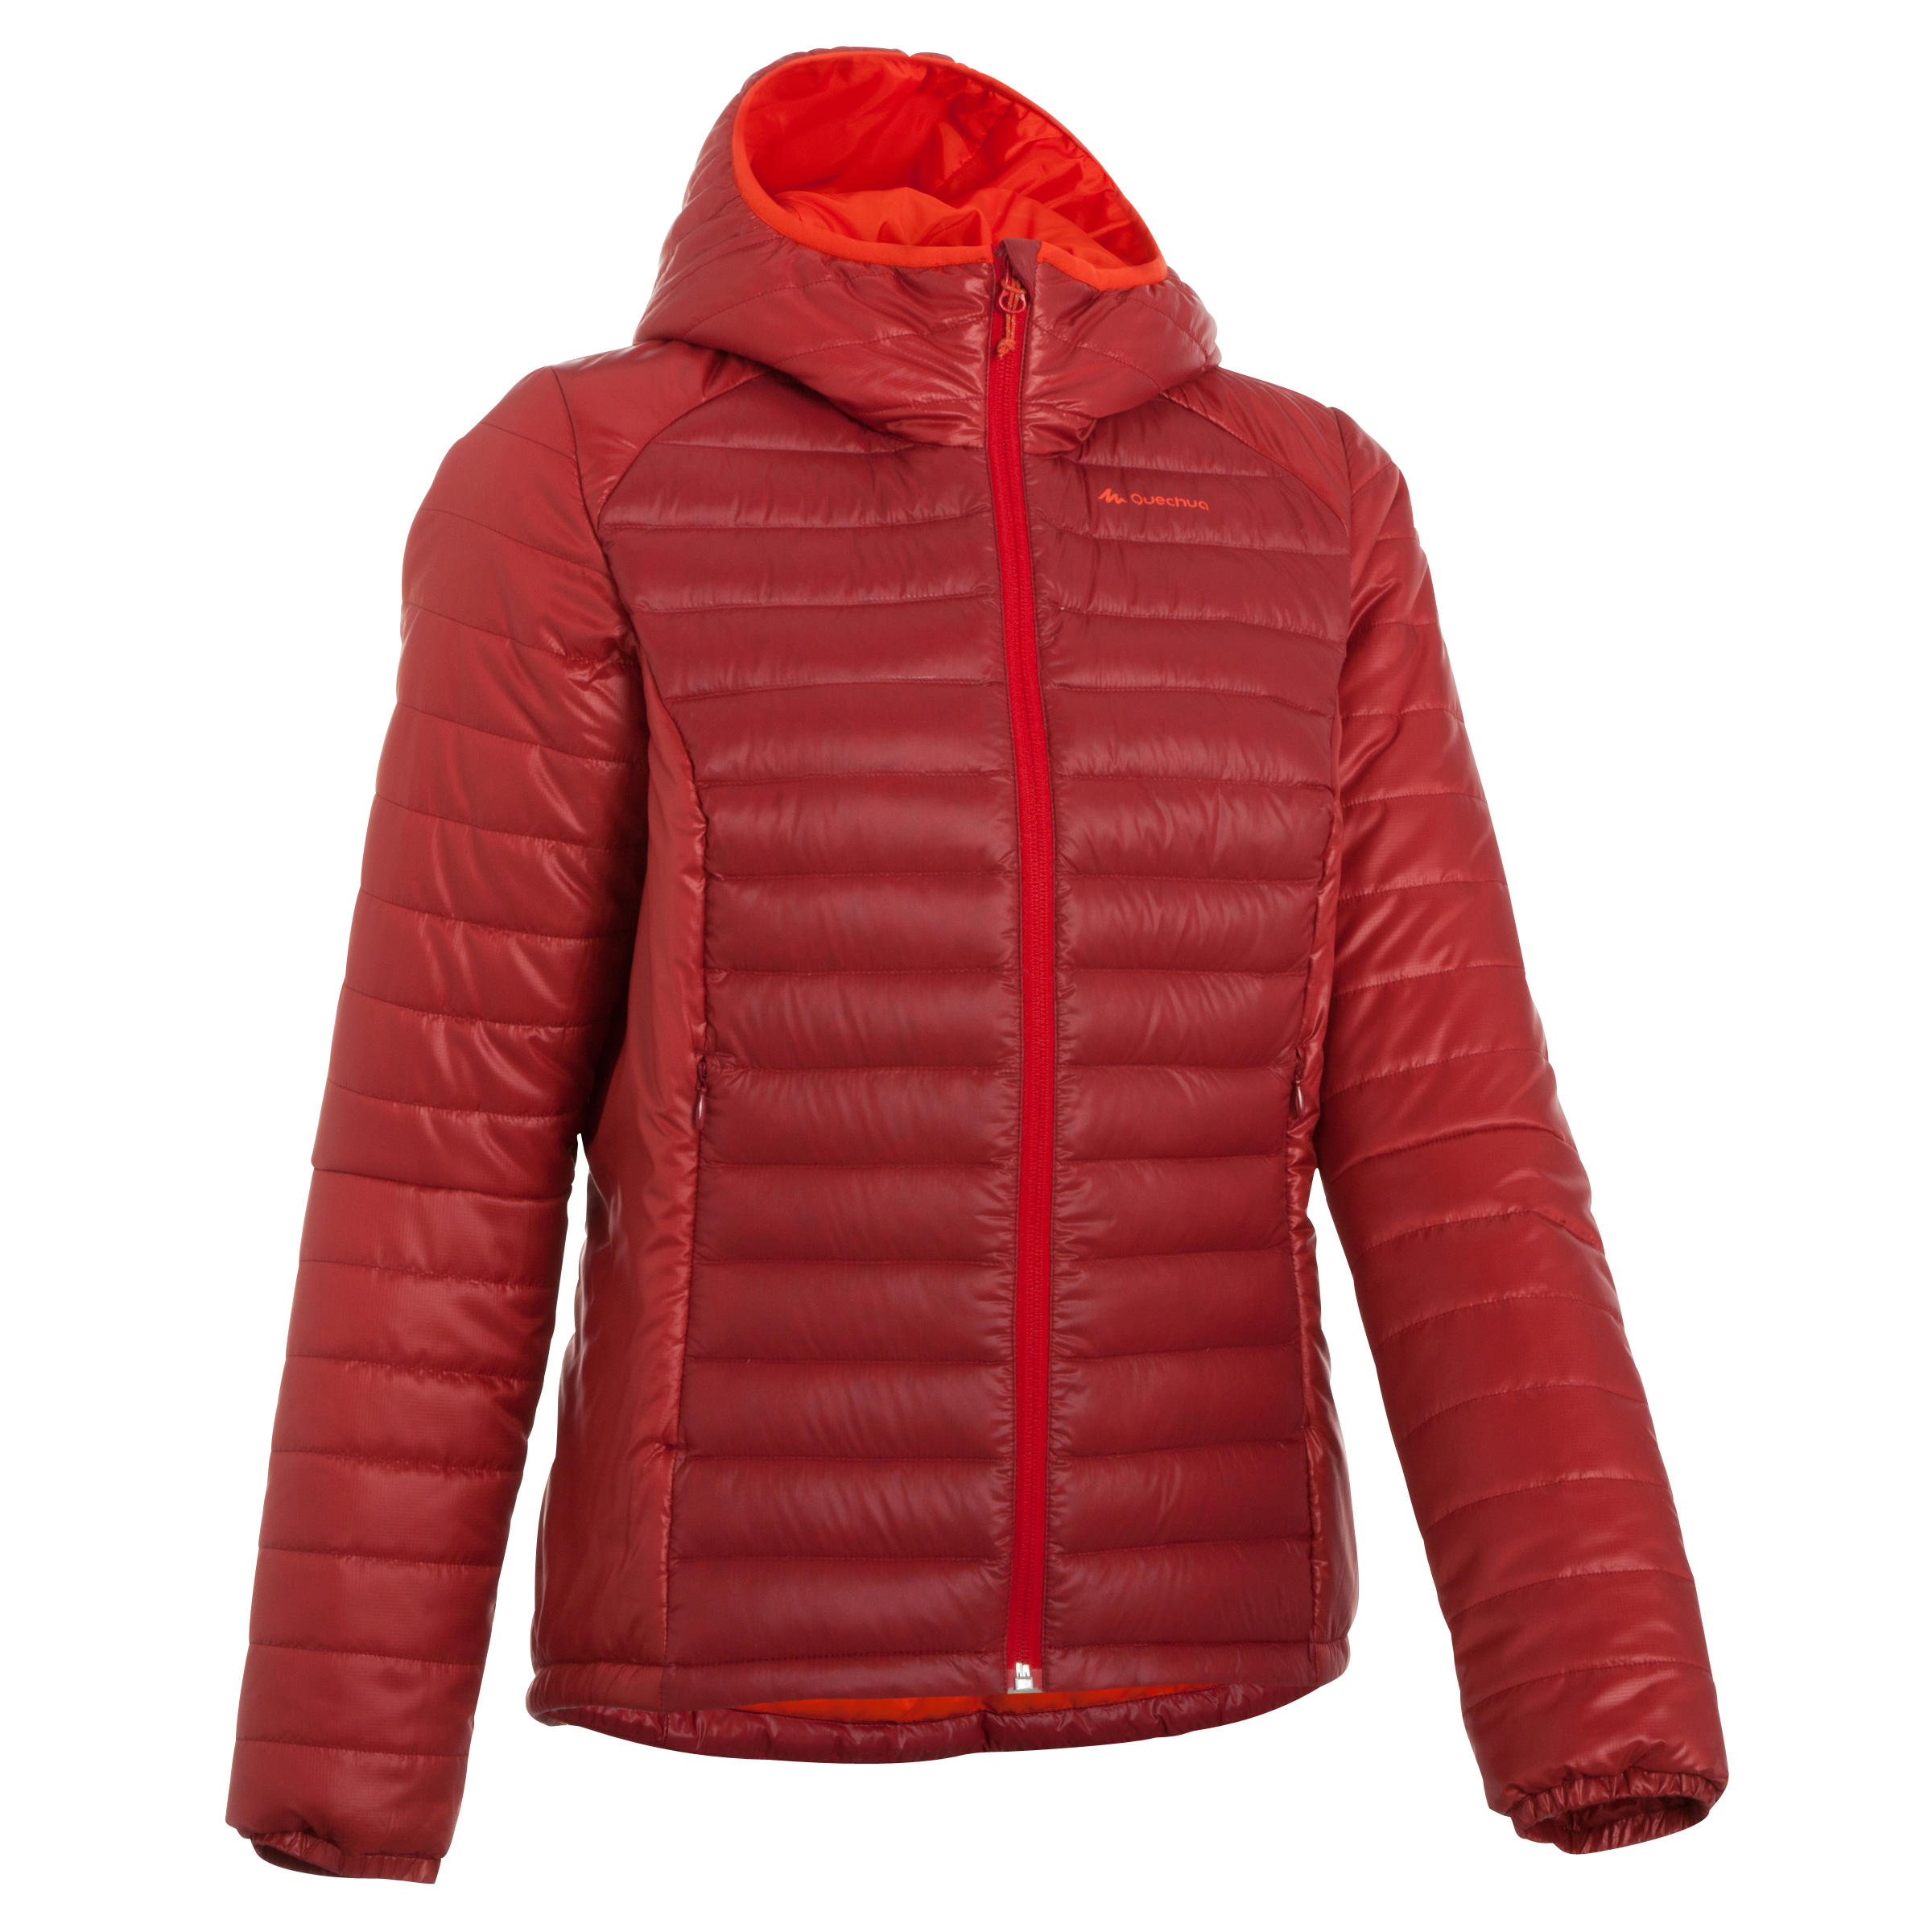 FORCLAZ X-Light Ladies' Quilted Hiking Jacket - red